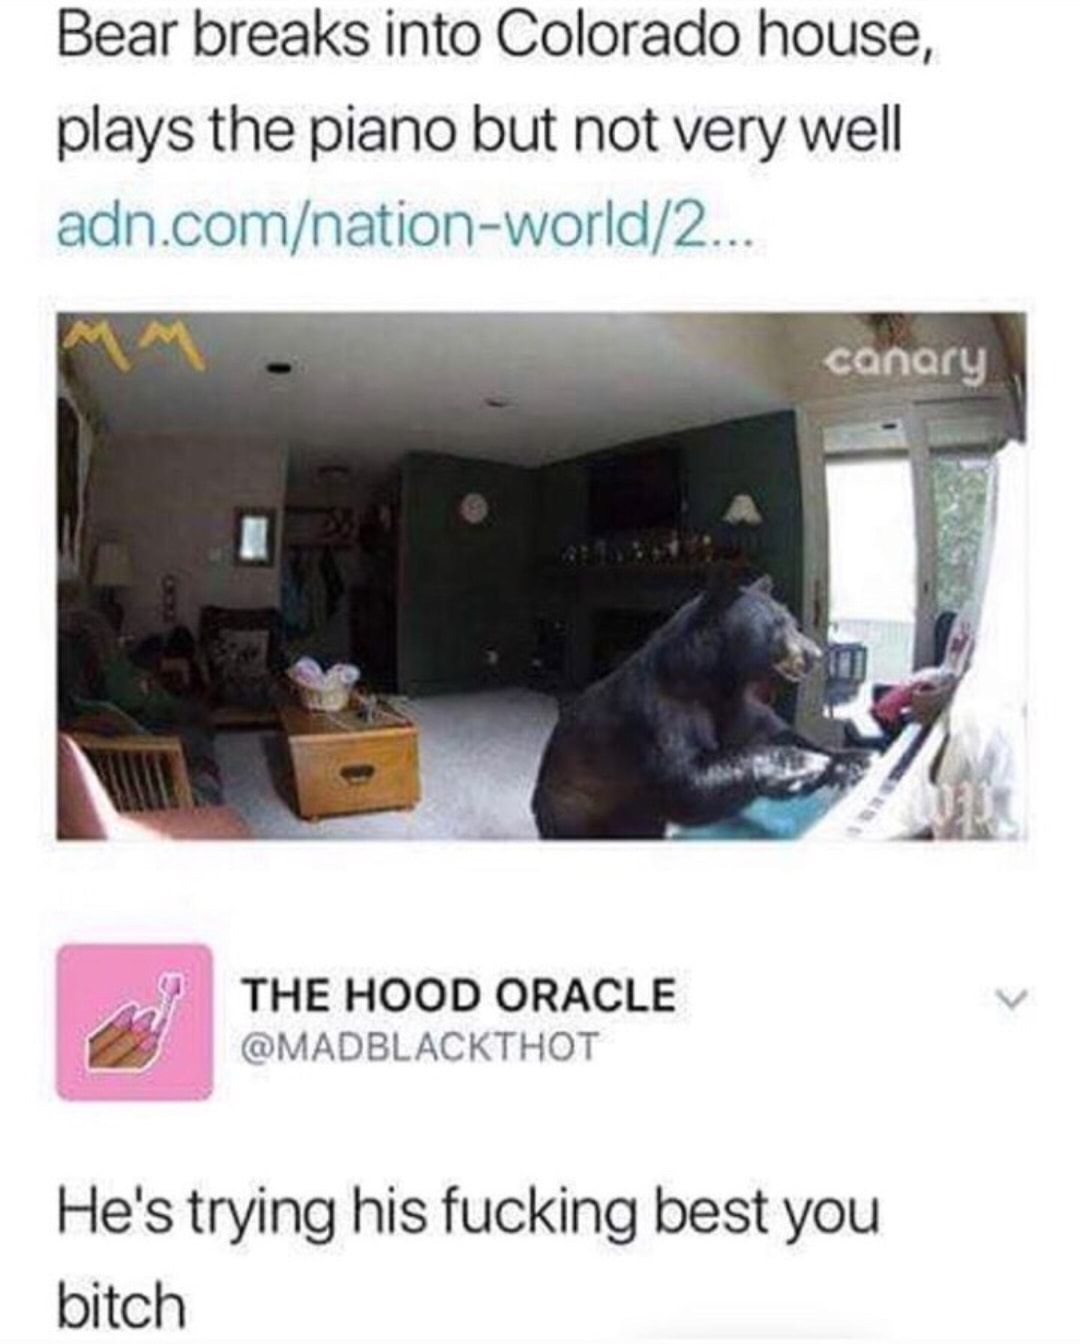 memes - he is trying his best - Bear breaks into Colorado house, plays the piano but not very well adn.comnationworld2... canary The Hood Oracle He's trying his fucking best you bitch